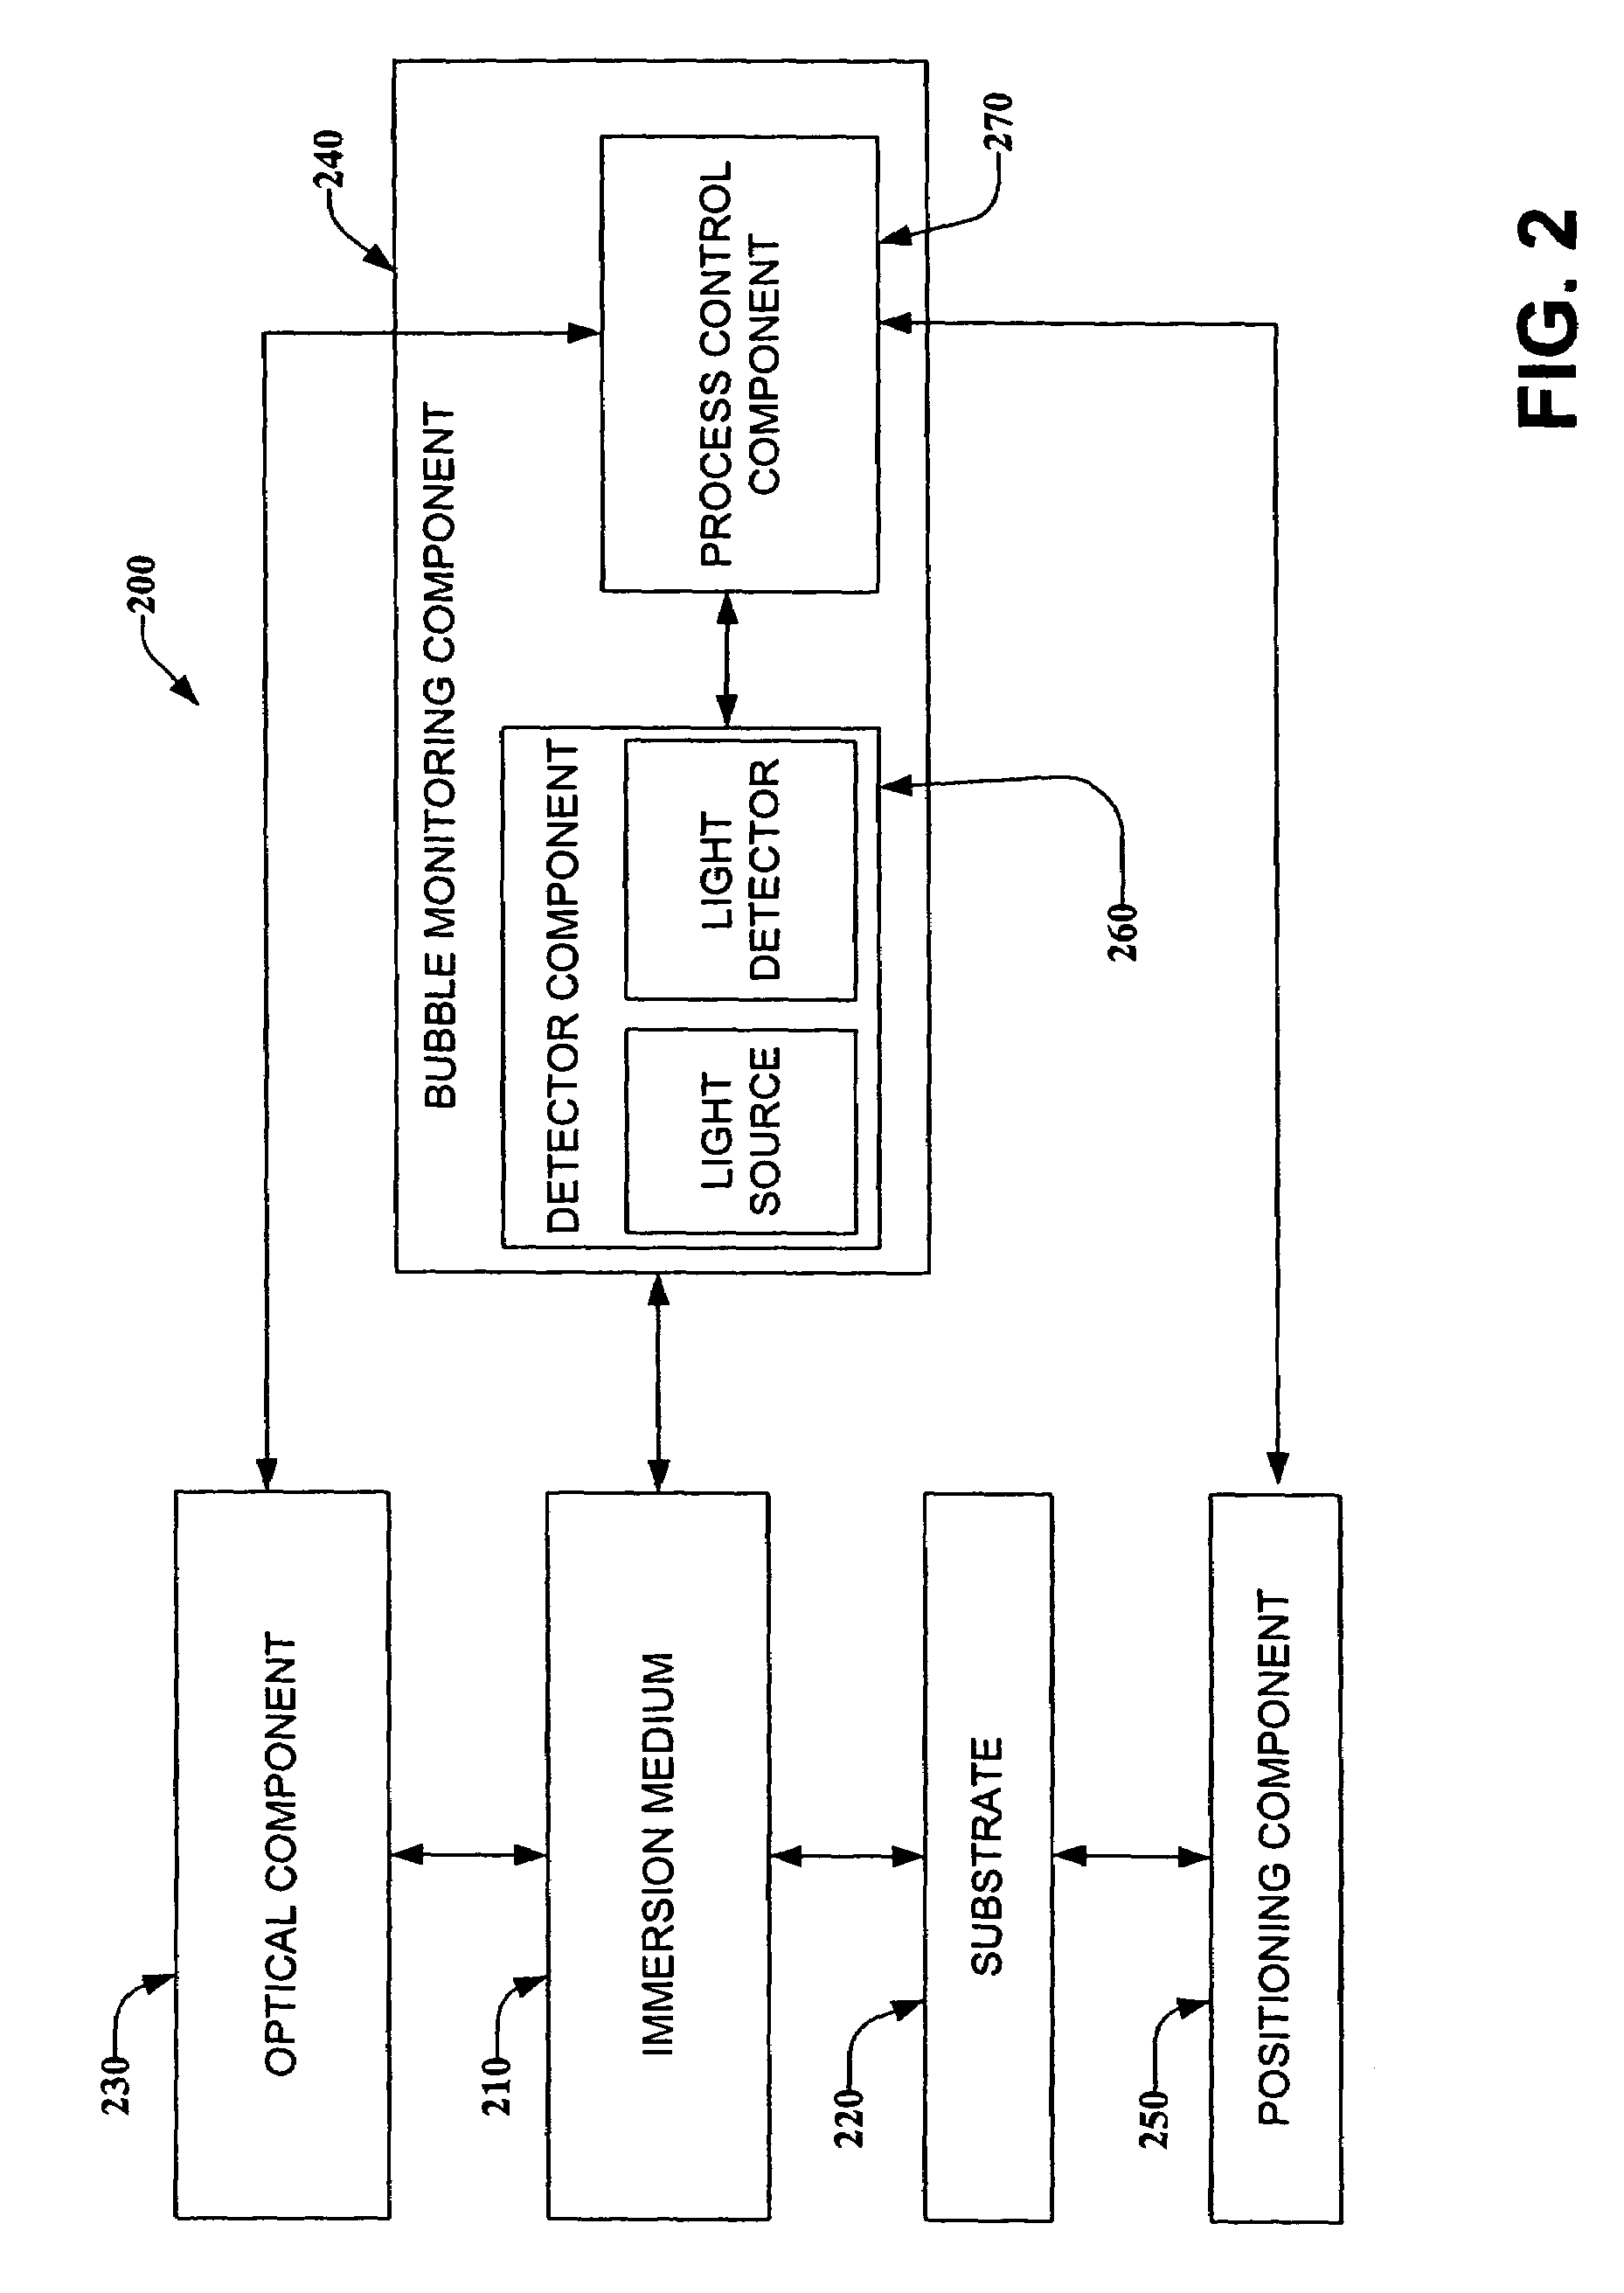 In-situ defect monitor and control system for immersion medium in immersion lithography